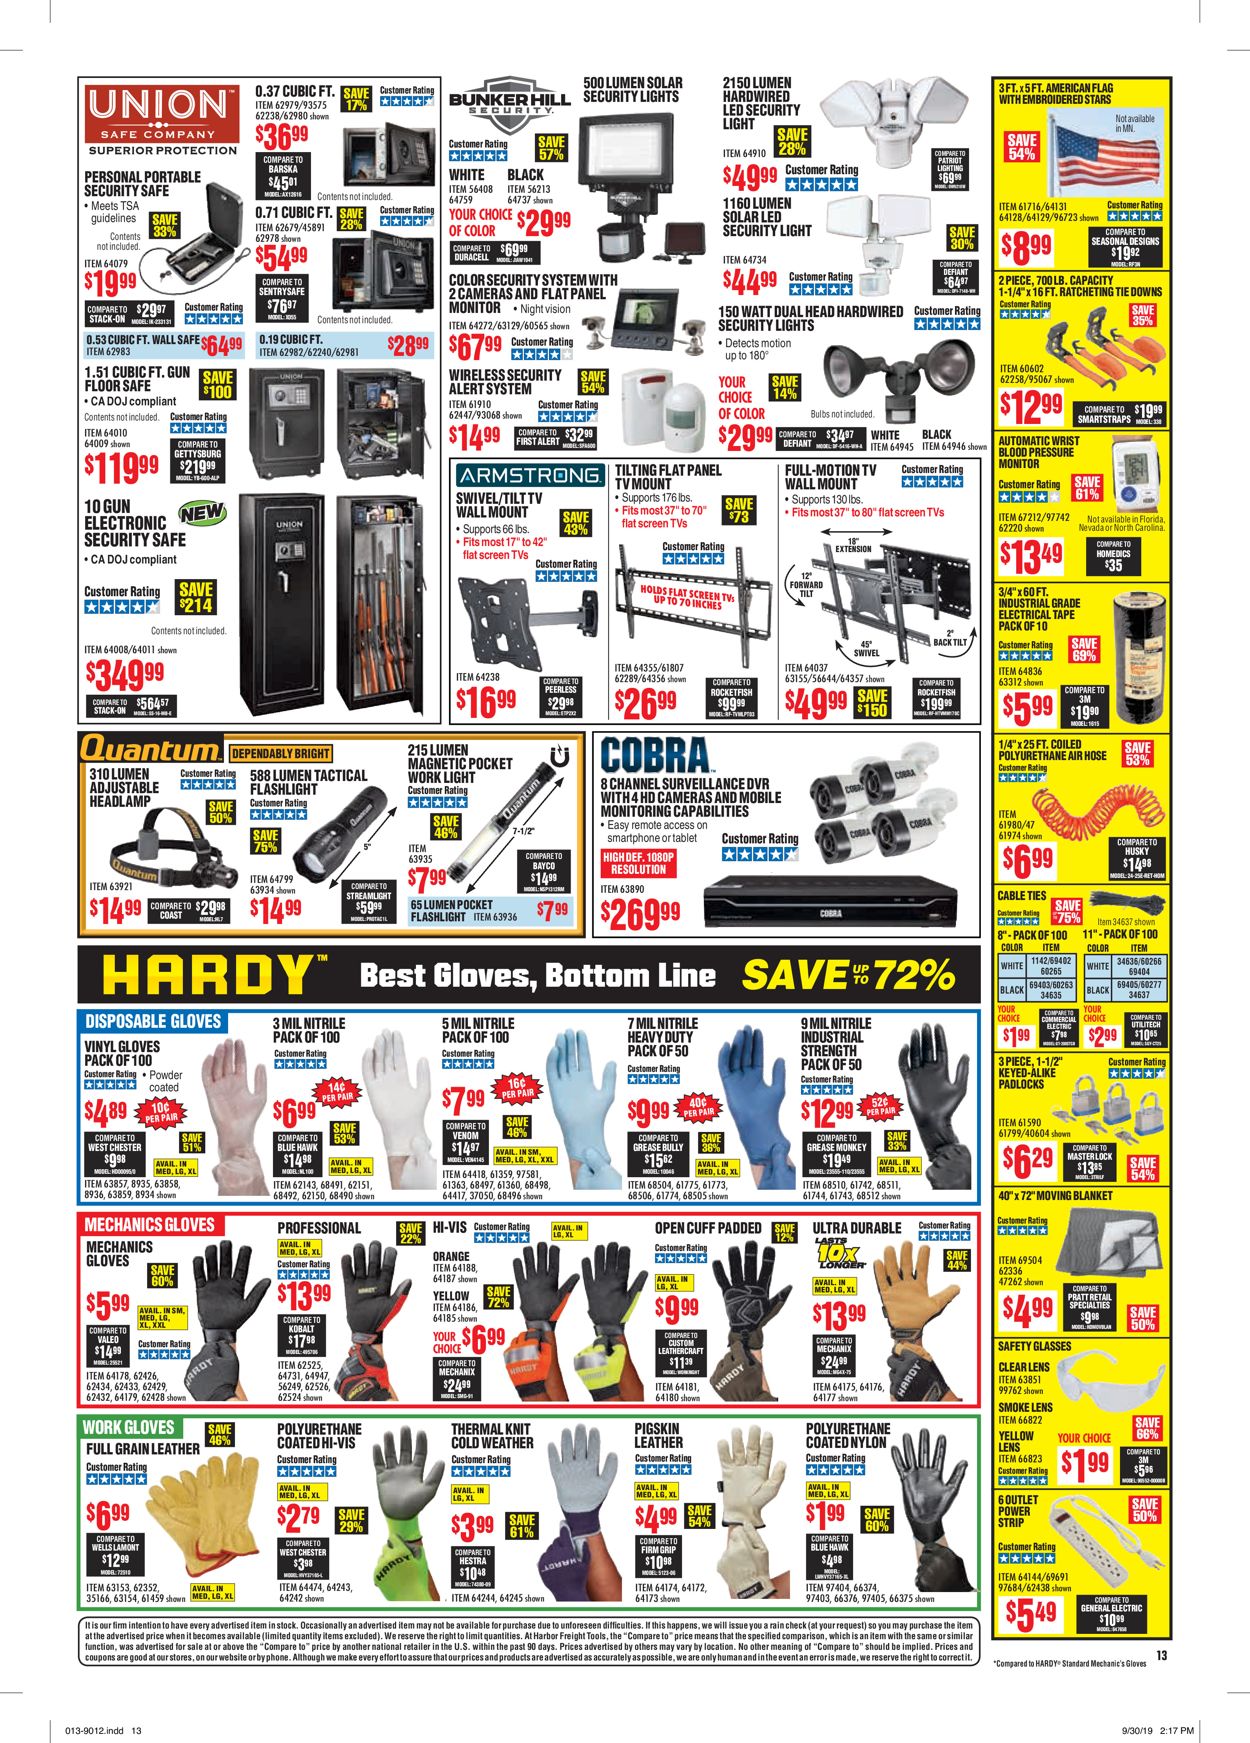 harbor freight bunker hill security dvr update 2019